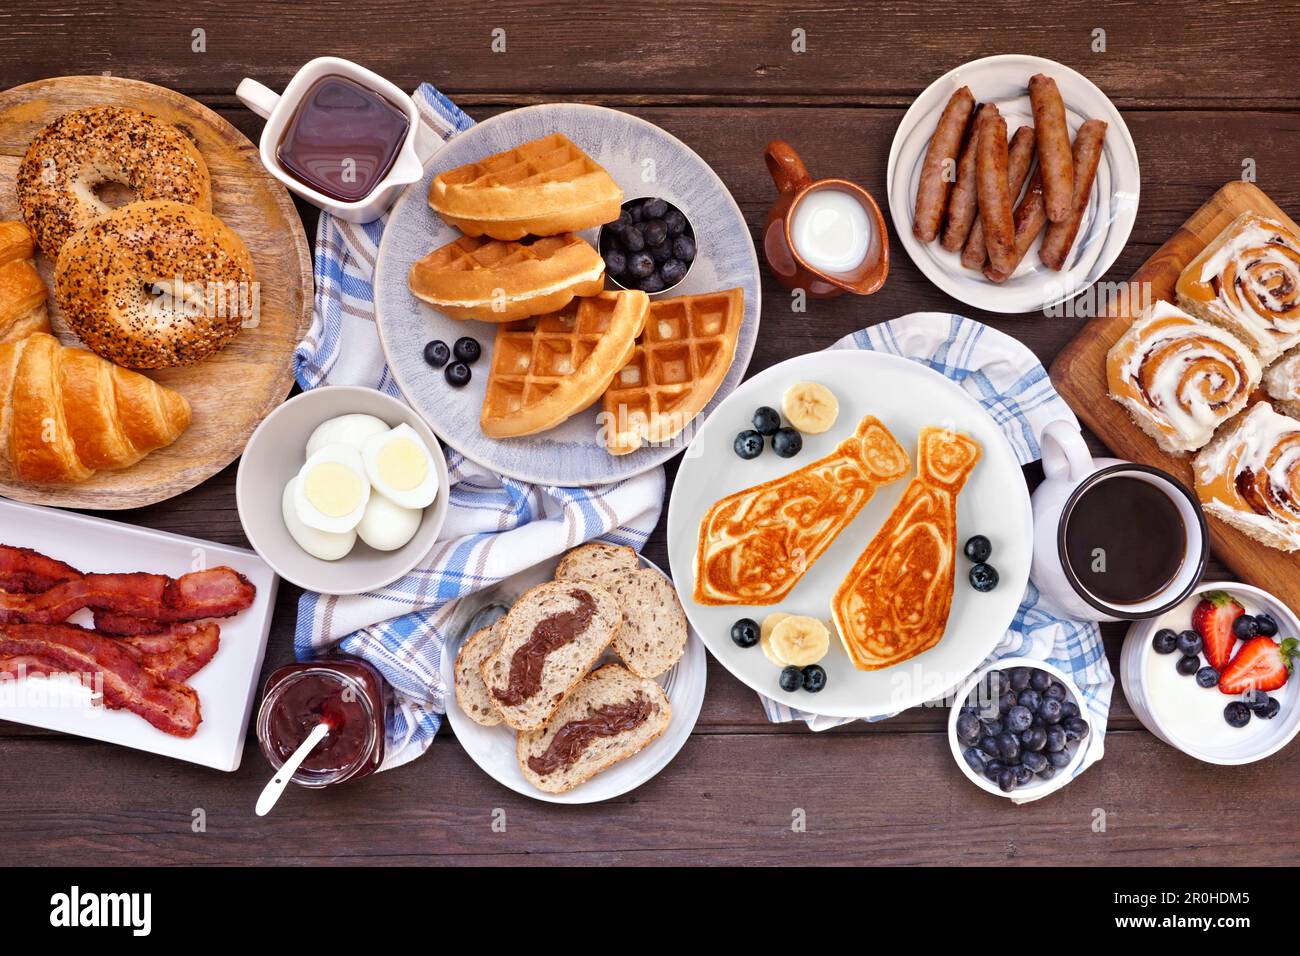 Fathers Day breakfast table scene. Top view on a dark wood background. Tie pancakes, mustache toast and a selection of dad themed food. Stock Photo